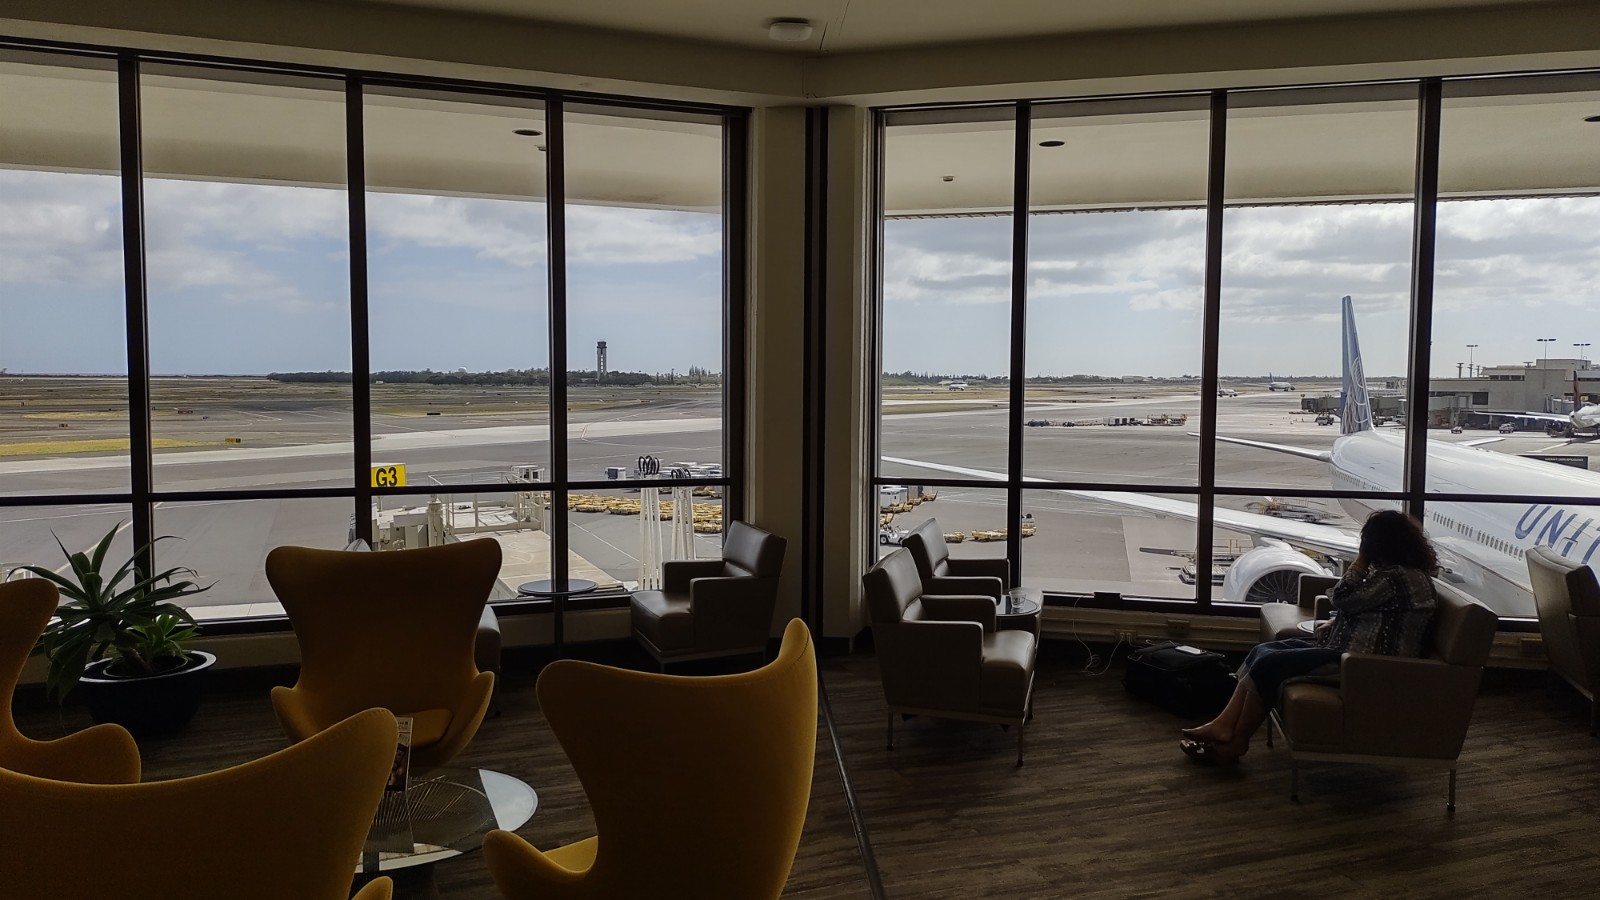 PICTURE OF THE LOUNGE OVERLOOKING AIRCRAFT AT THE GATE BELOW.